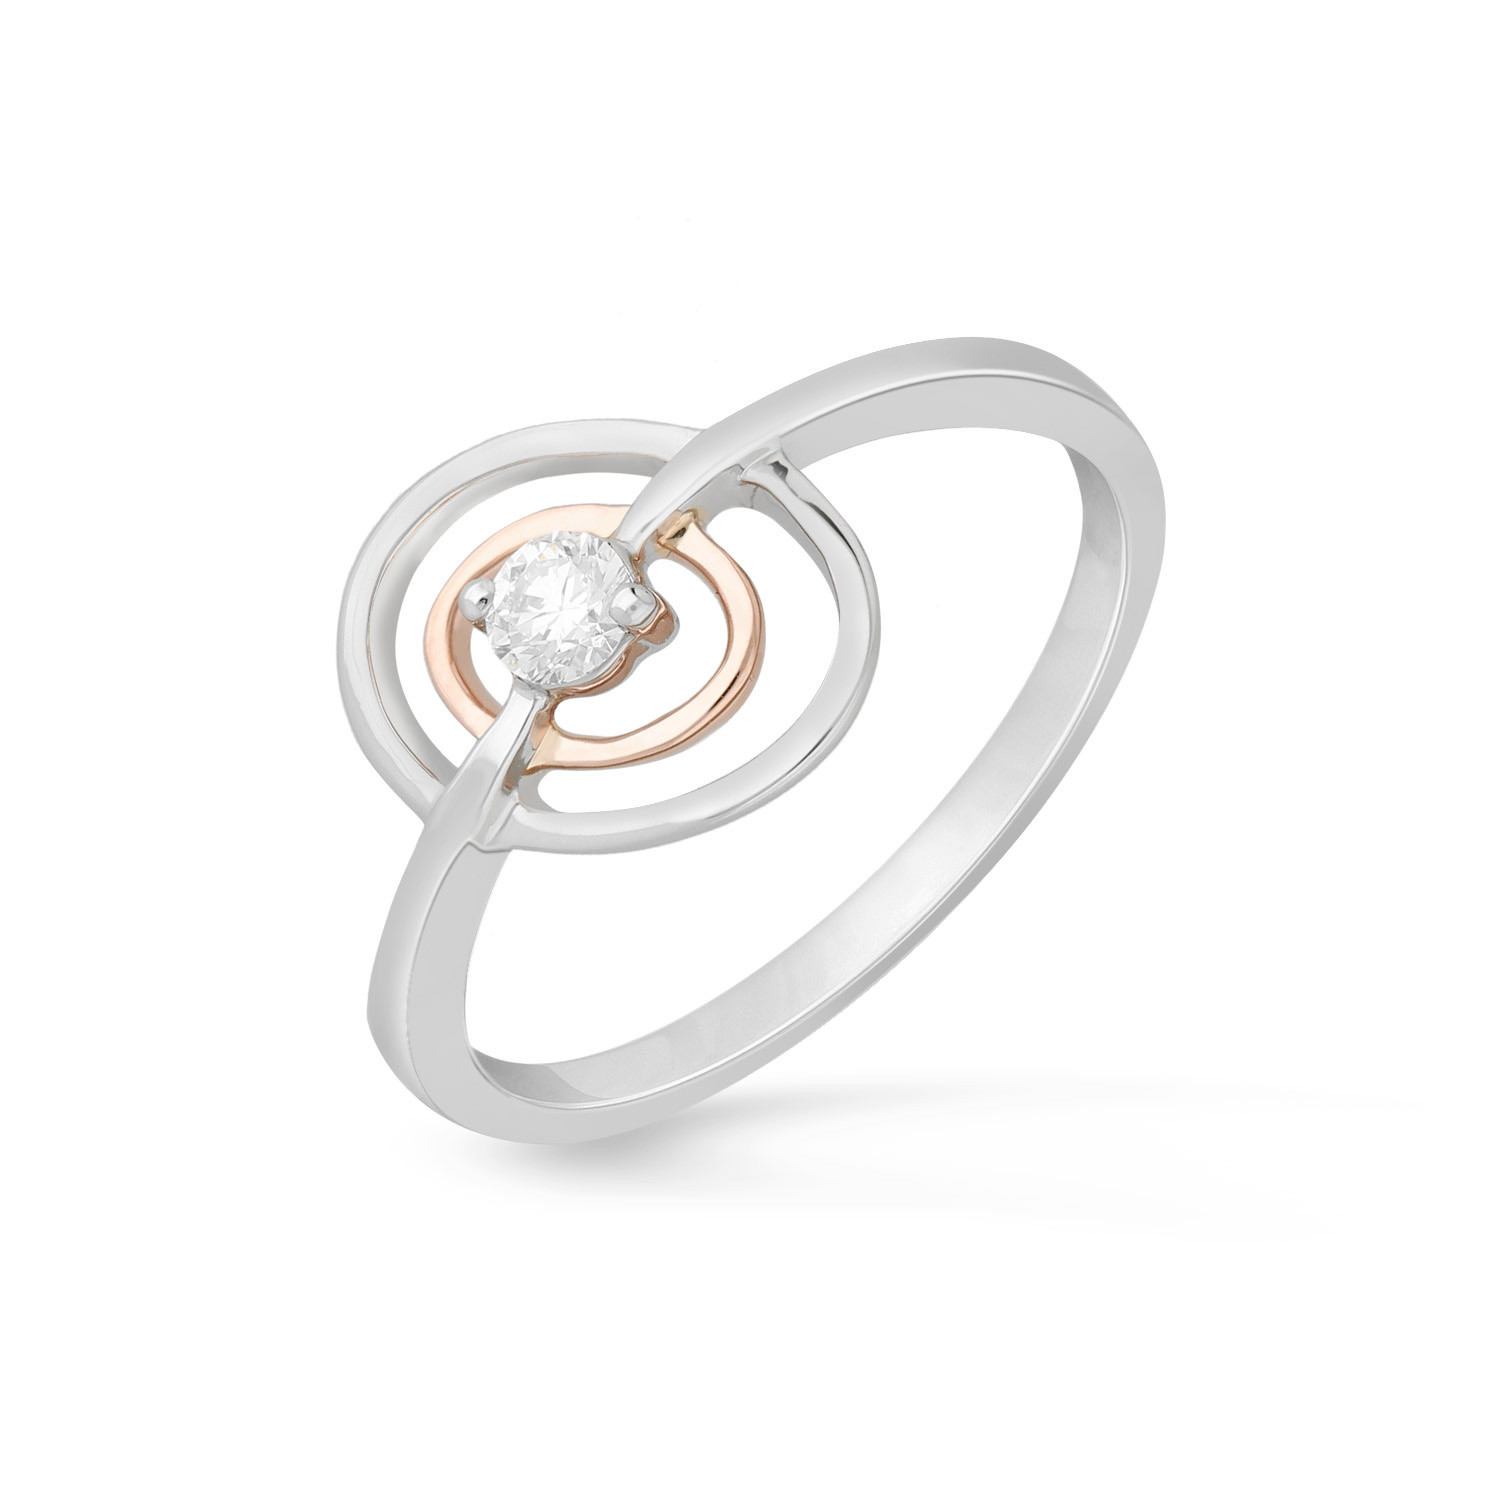 Unisex Almiunium Siver Infinity Ring Rs 50 Per Piece, Adjustable at Rs  42/piece in Gurgaon